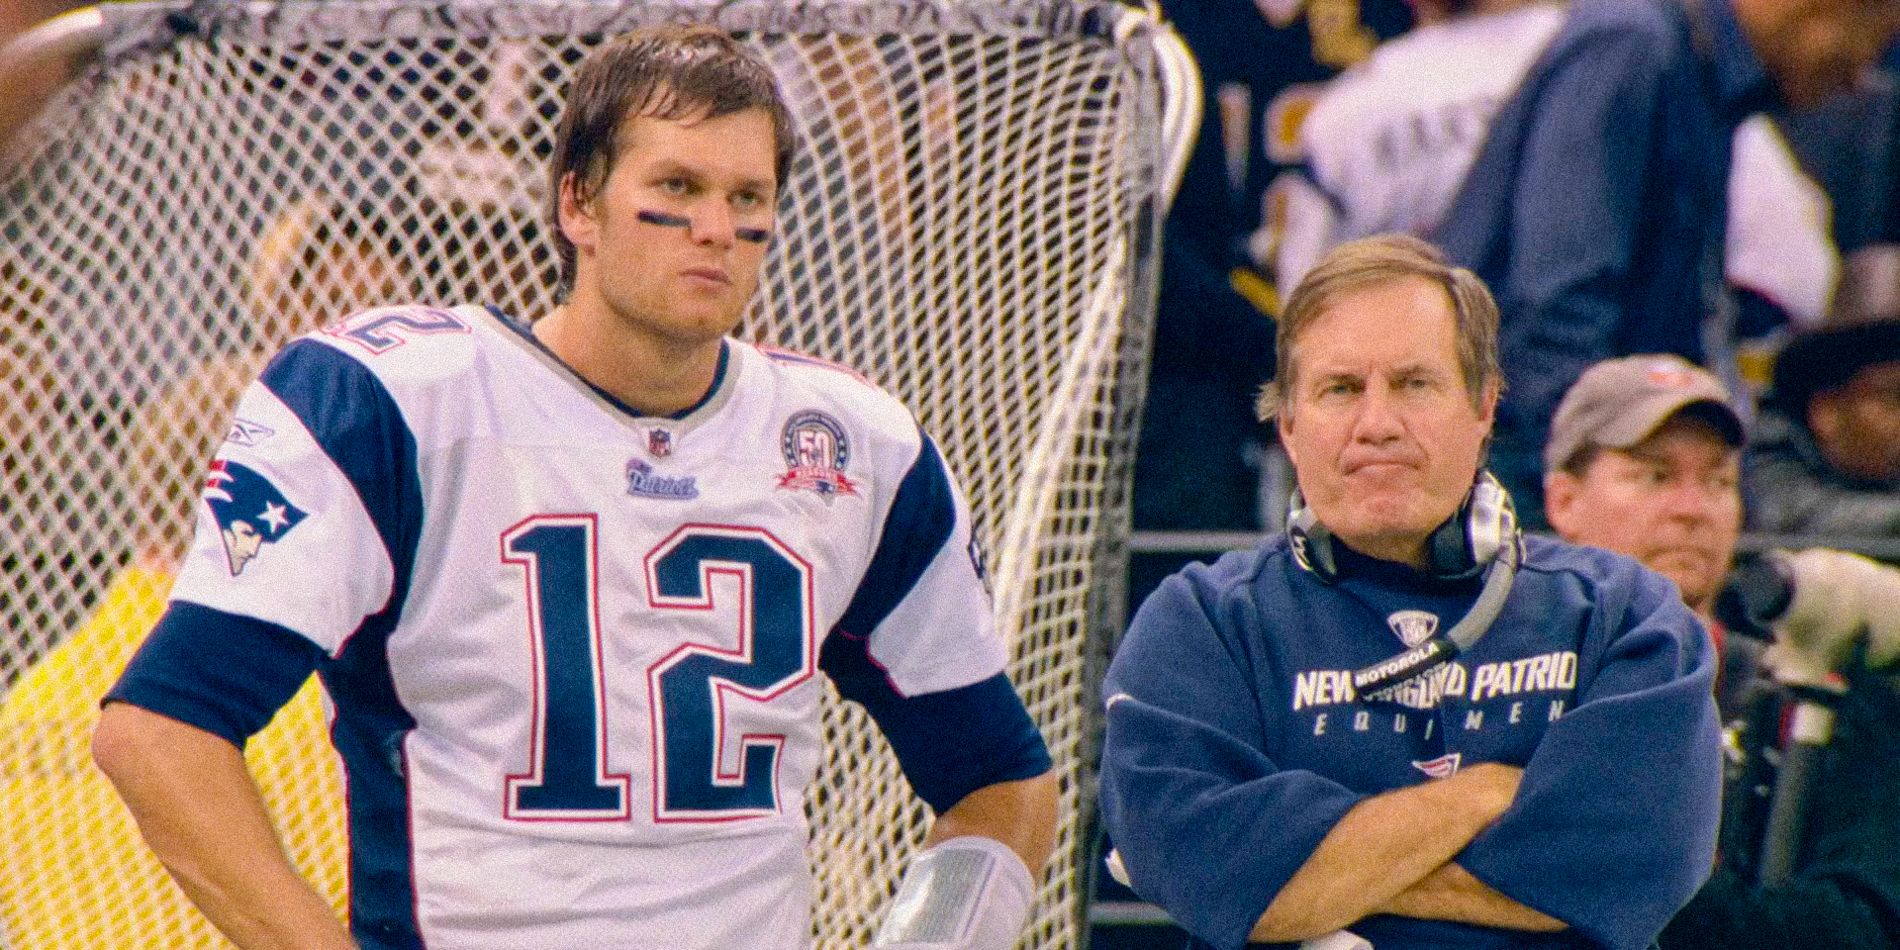 Tom Brady and Bill Belichick watching a match in The Dynasty England Patriots